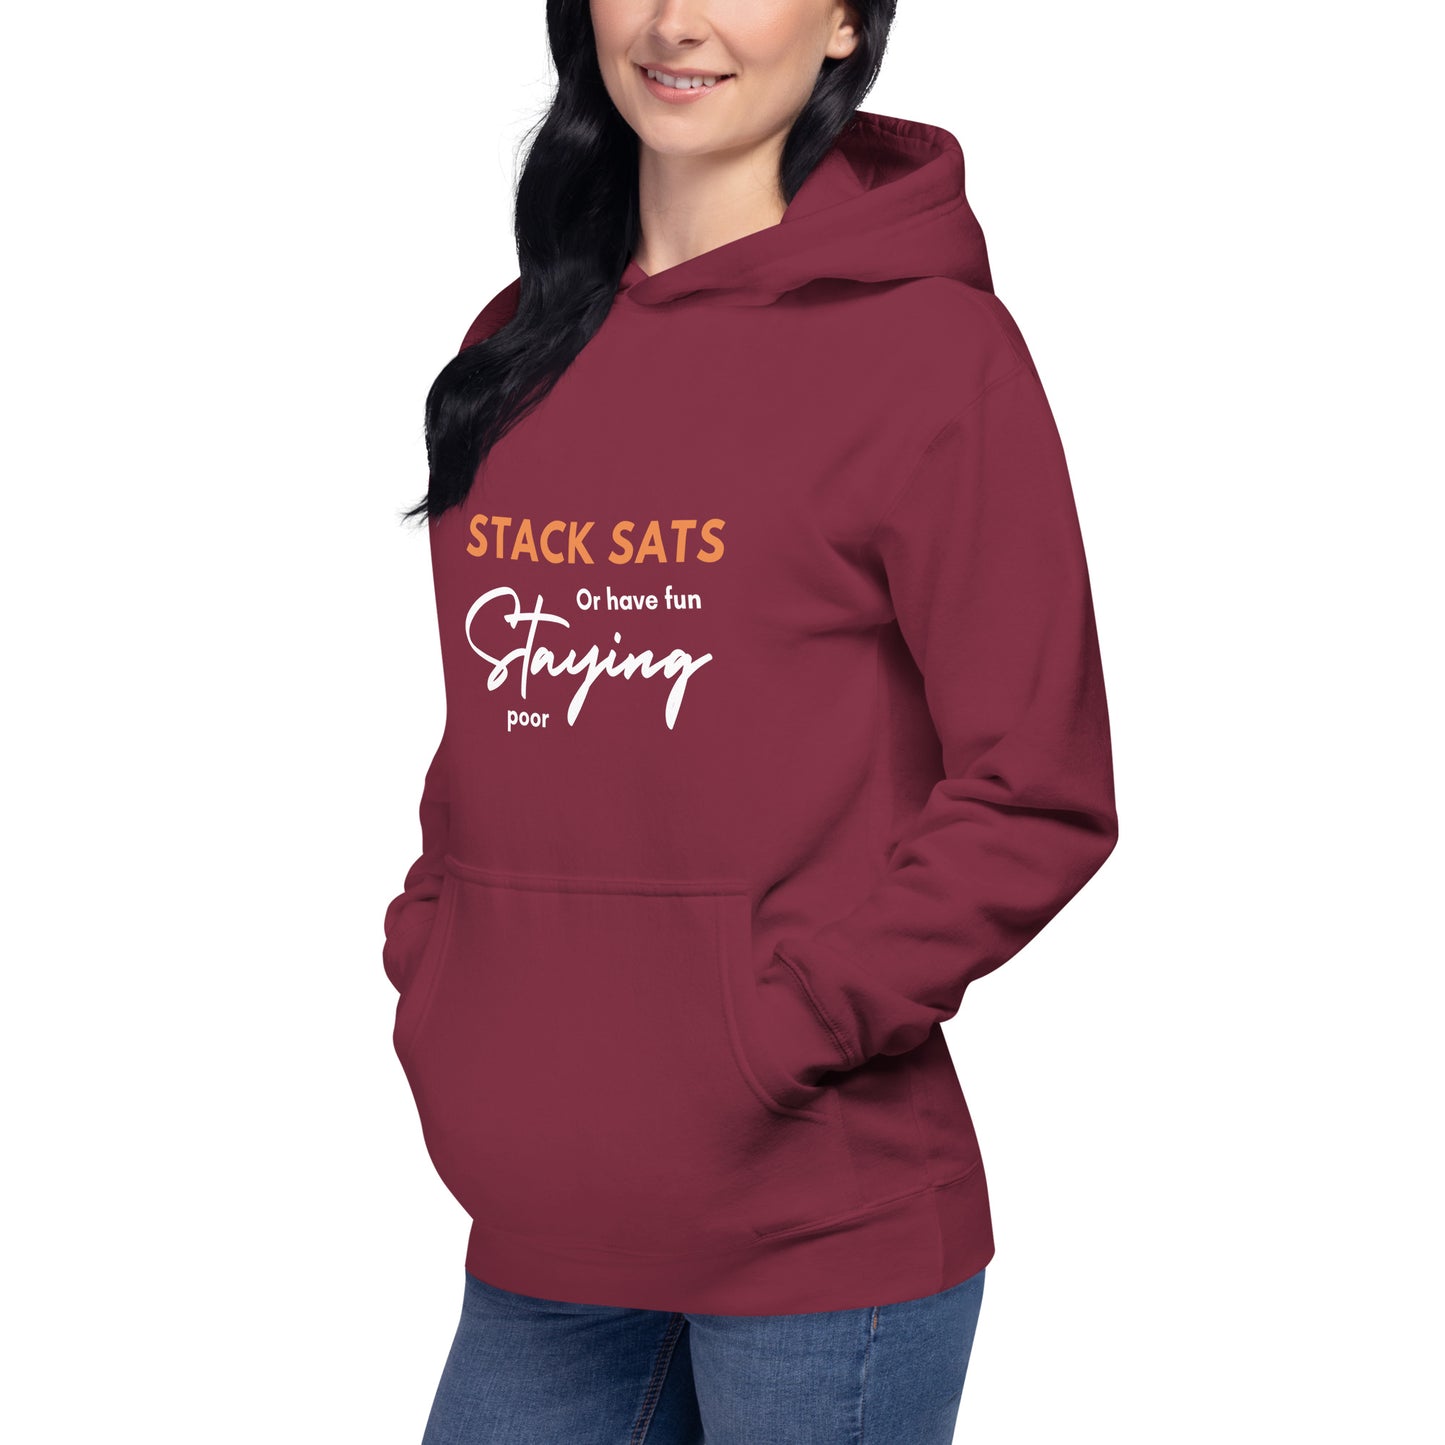 Stack sats or have fun staying poor Unisex Hoodie